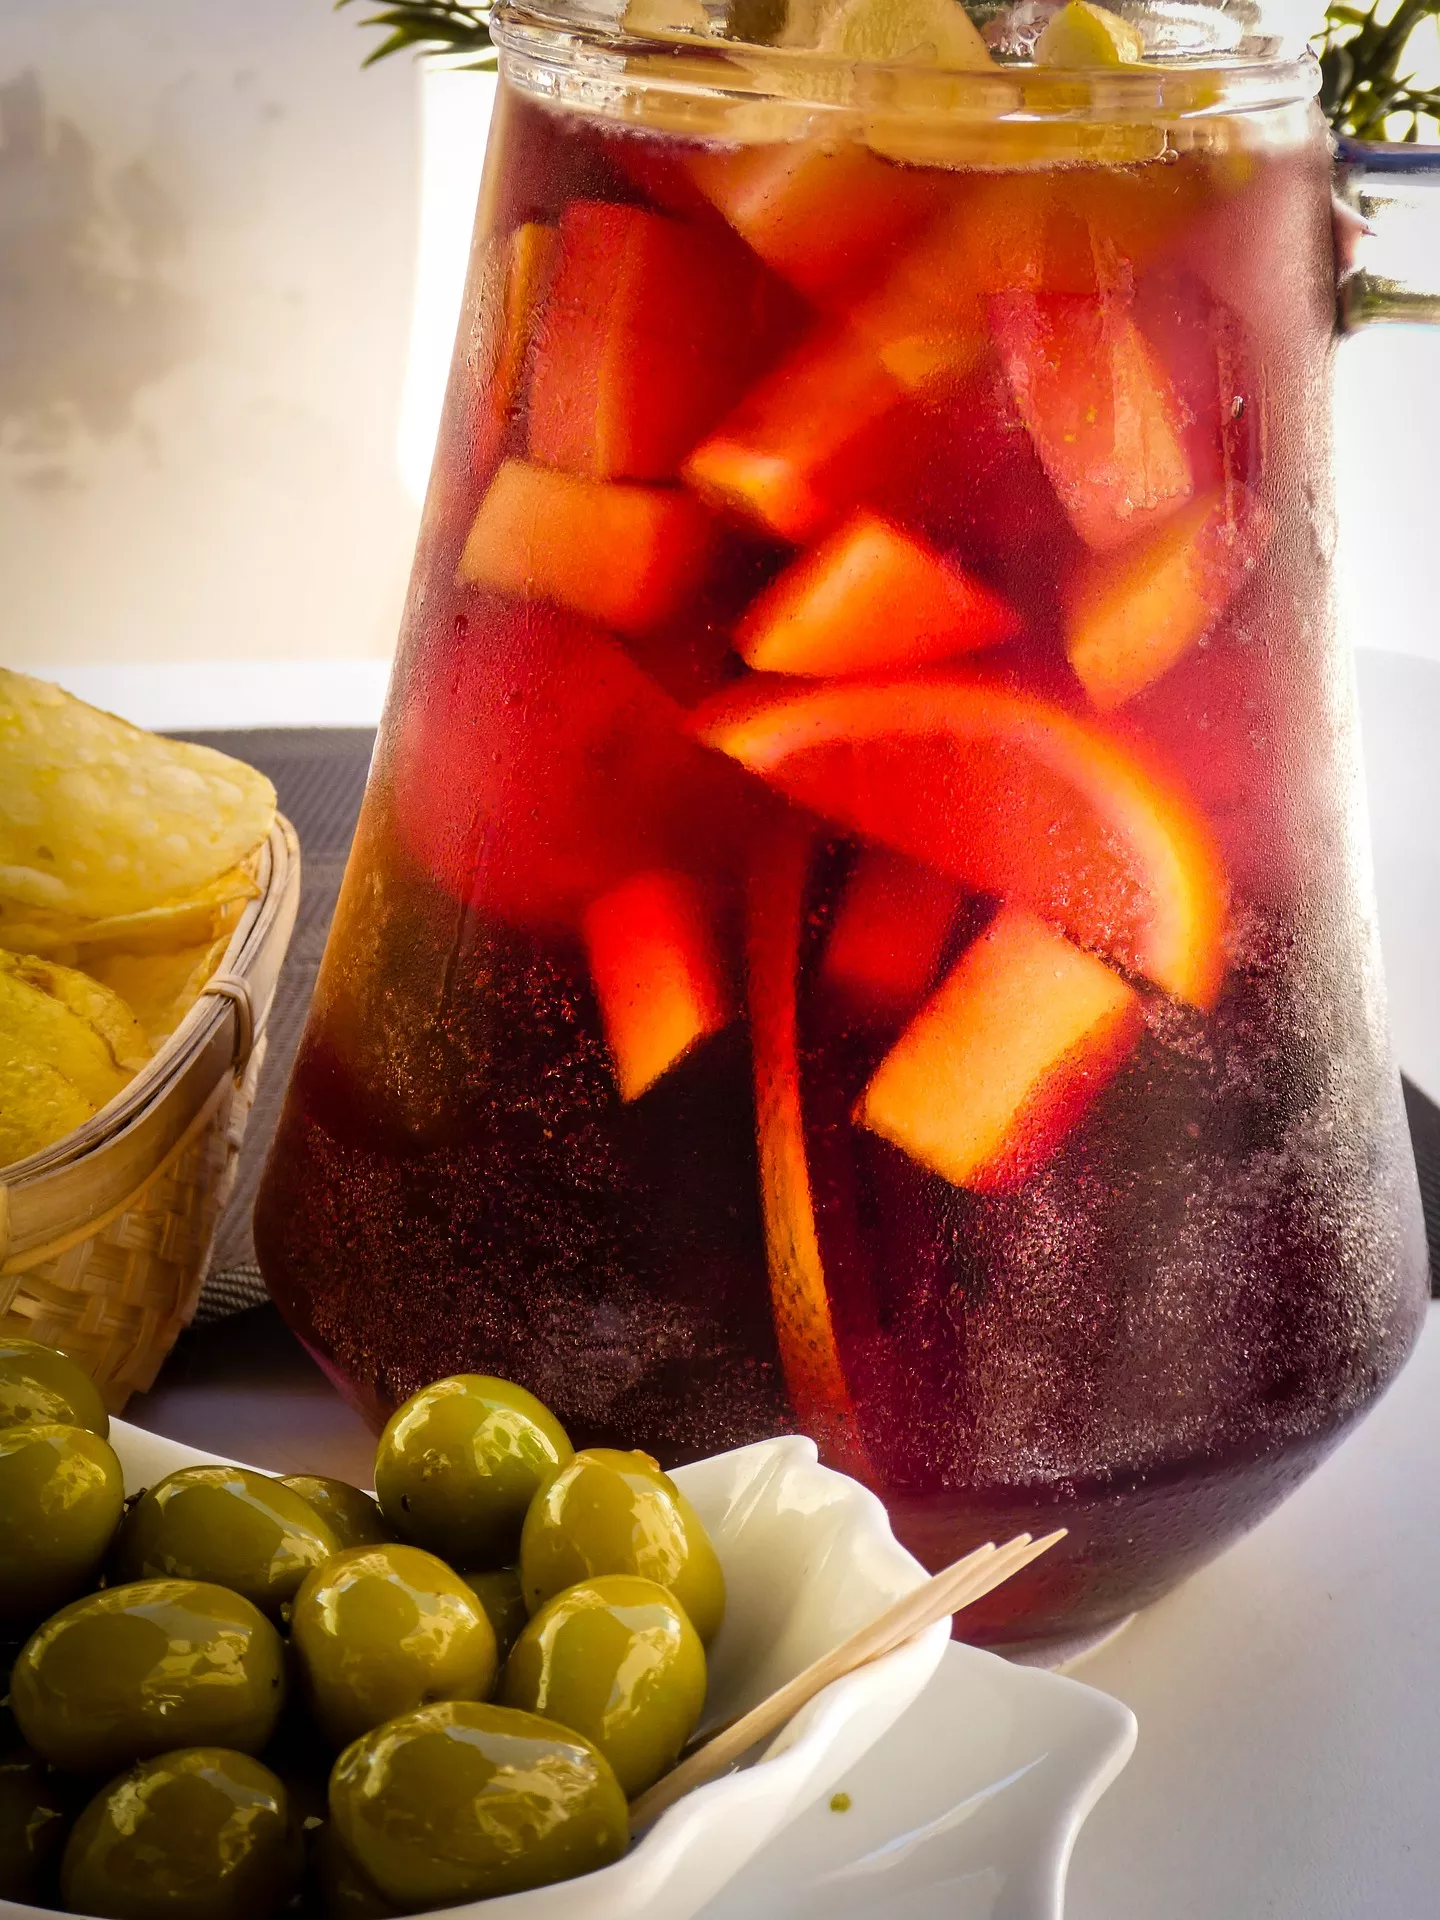 Learning to make sangria in Barcelona